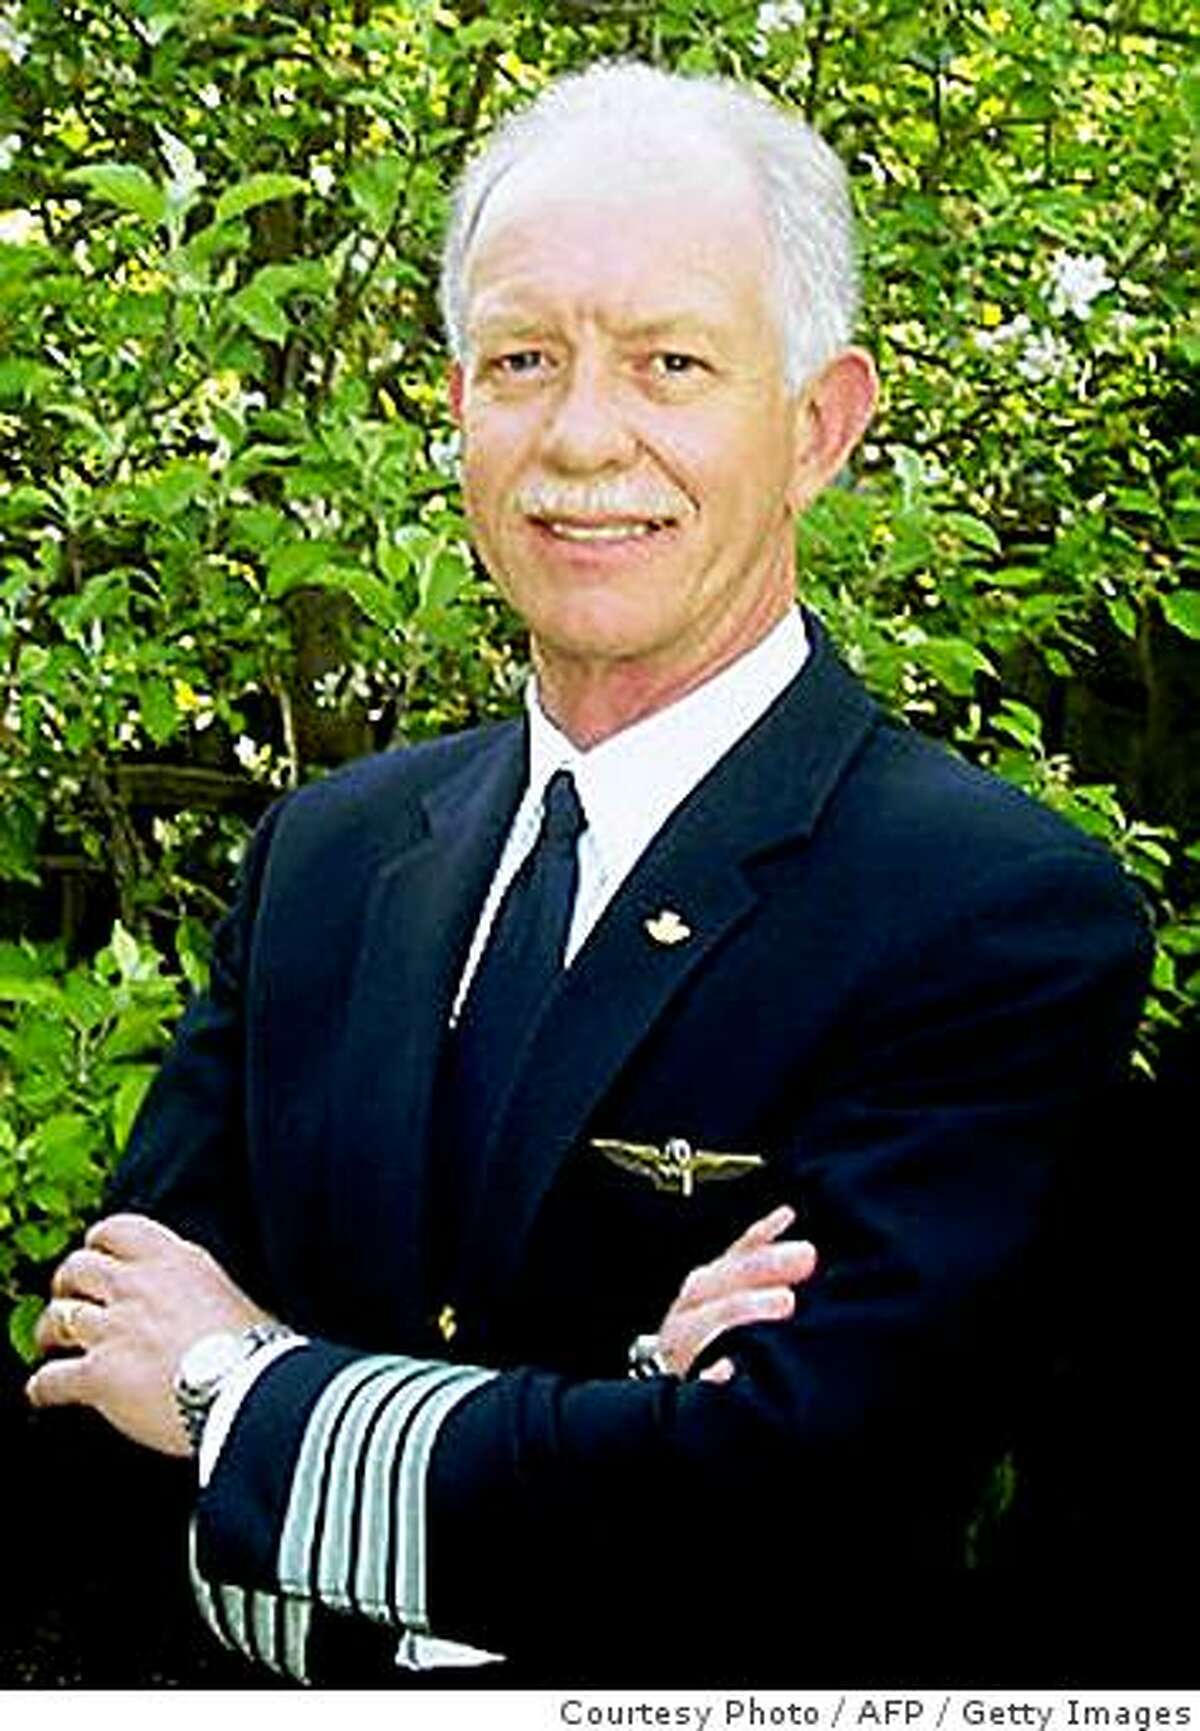 This undated January 15, 2009 file photo shows SRM Founder Chesley B. "Sully" Sullenberger, III is a captain for a major U.S. airline with over 40 years of flying experience.